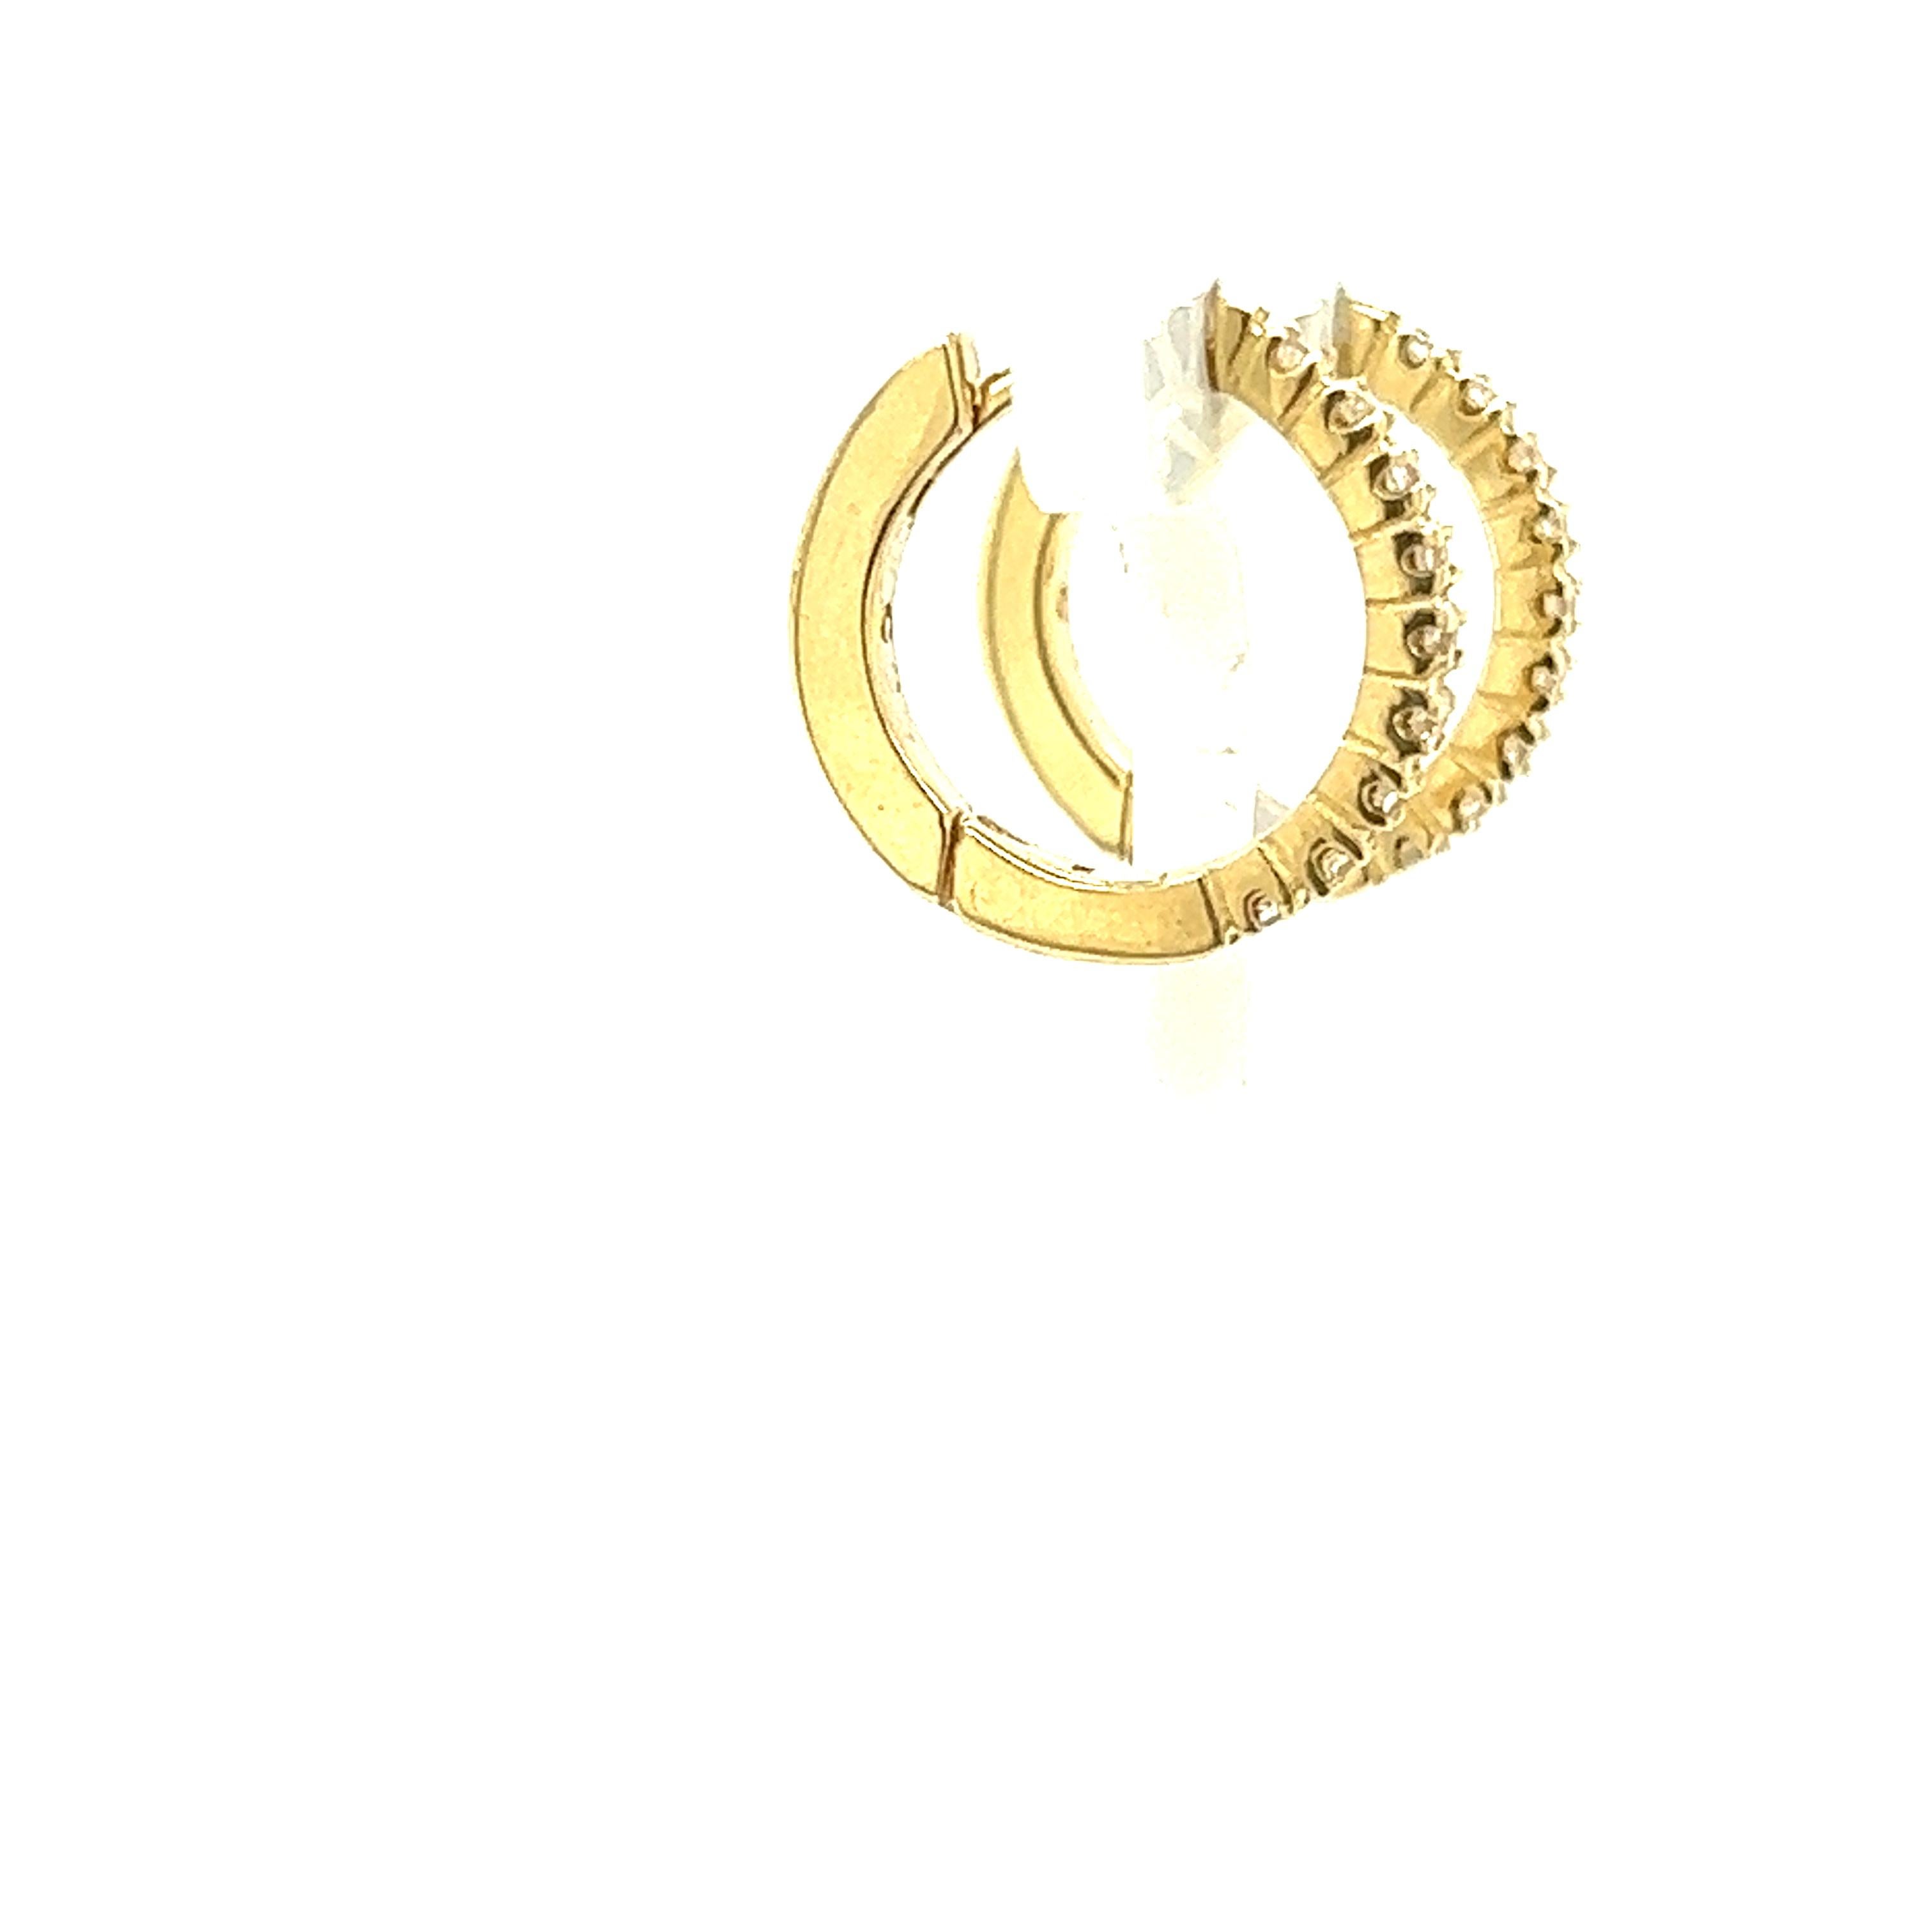 Round Cut Hand-Crafted 14K Yellow Gold Diamond Hoop Earrings For Sale